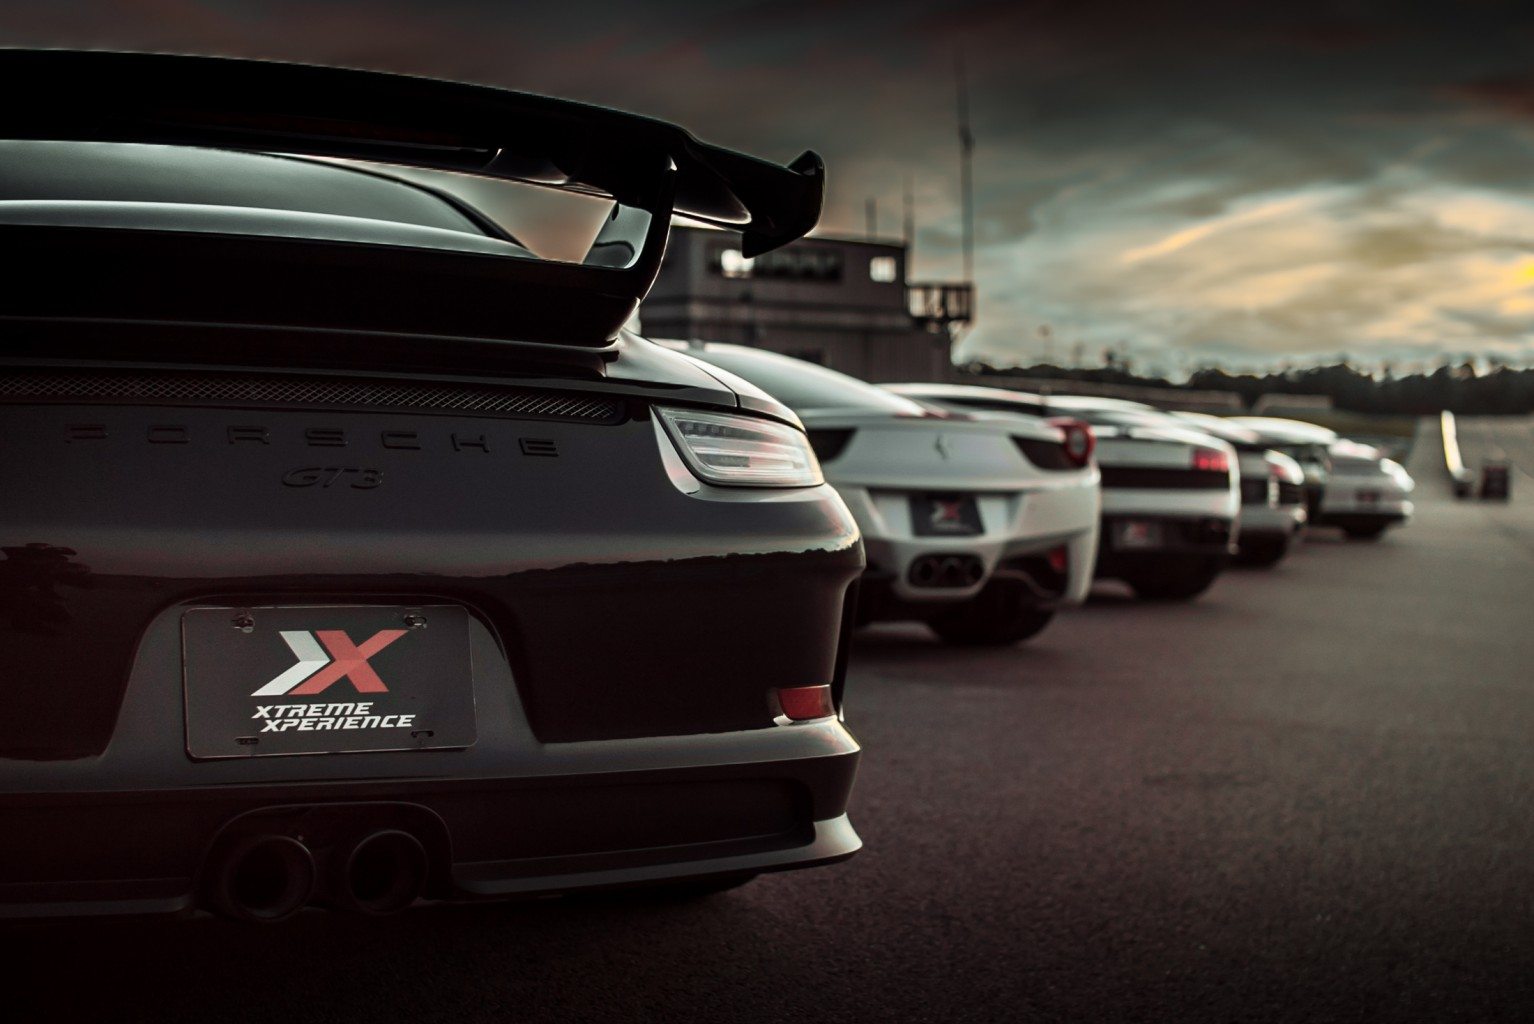 image xtreme xperience fleet of supercars at pitt race 